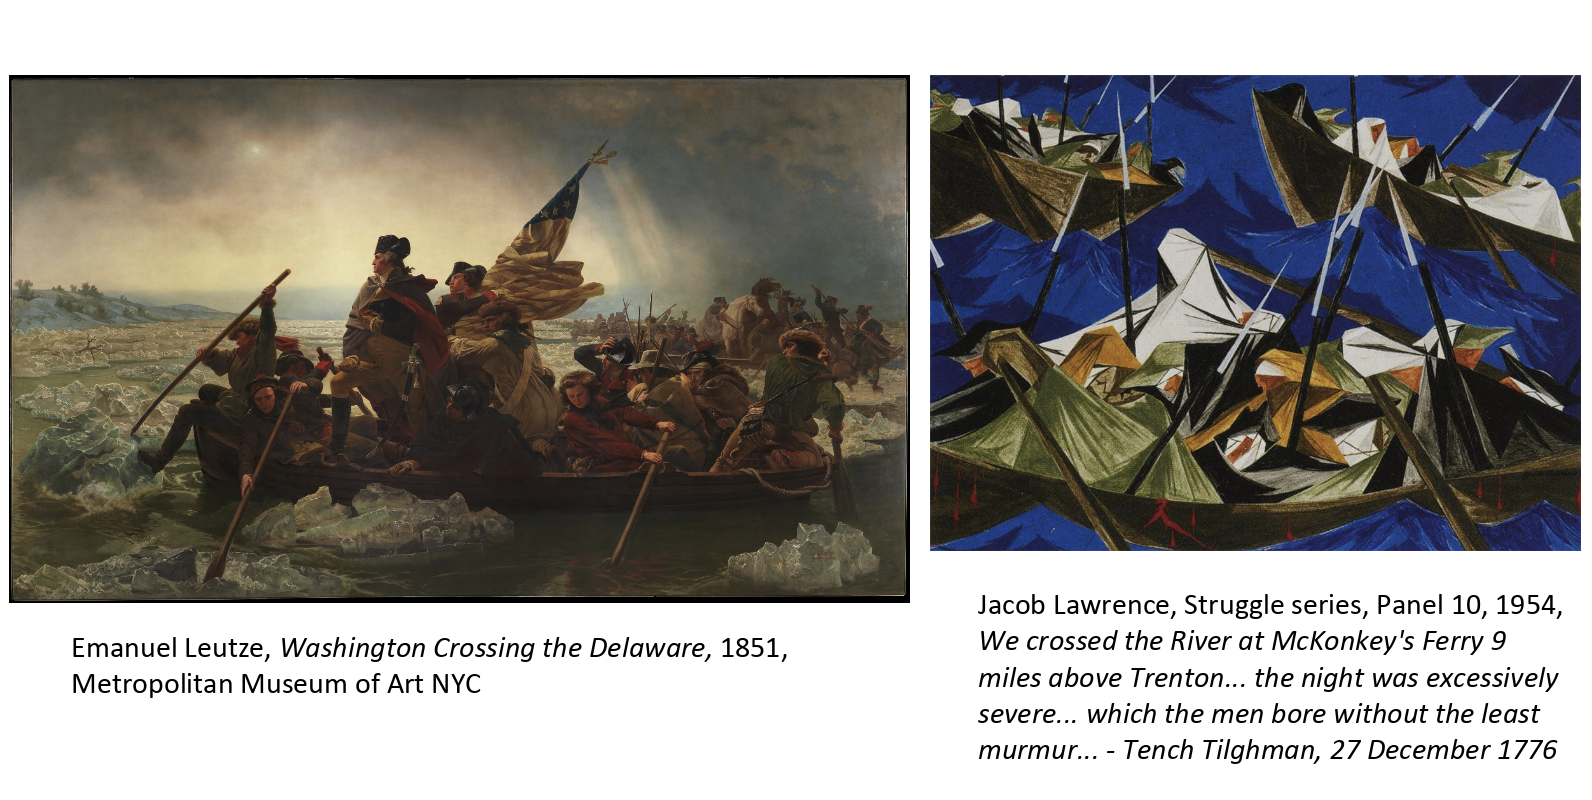 A comparison of paintings